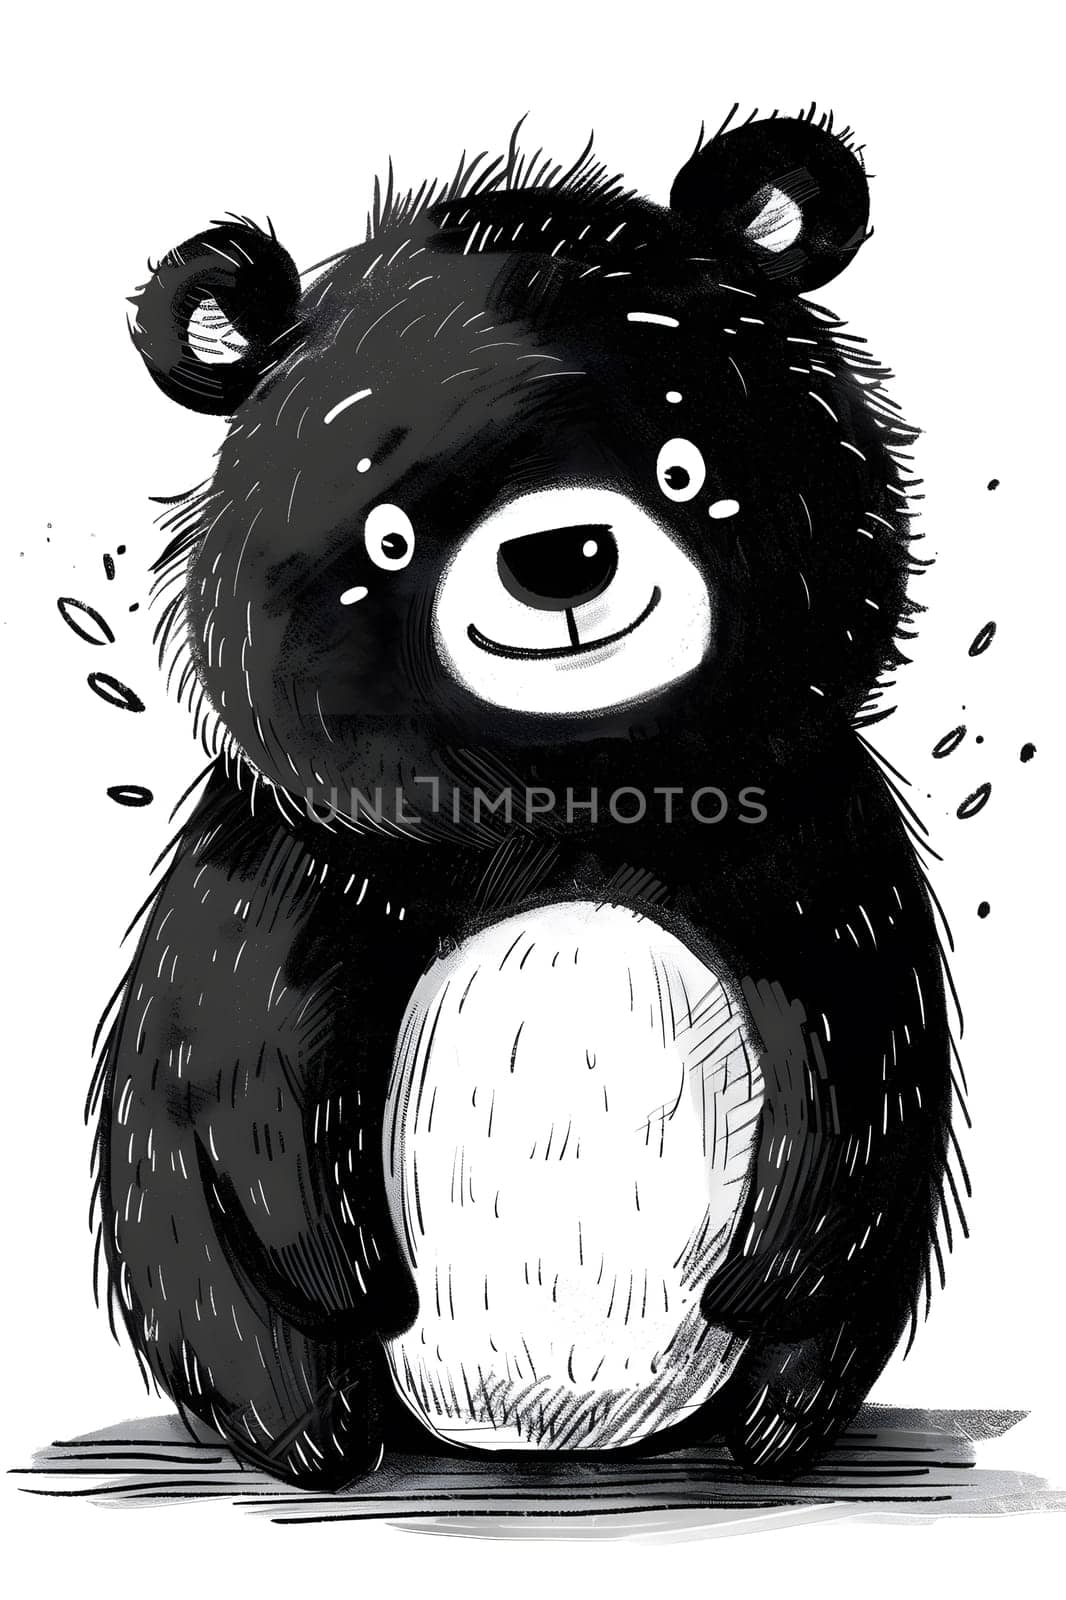 Monochrome drawing of a sitting teddy bear, with fur and snout details by Nadtochiy